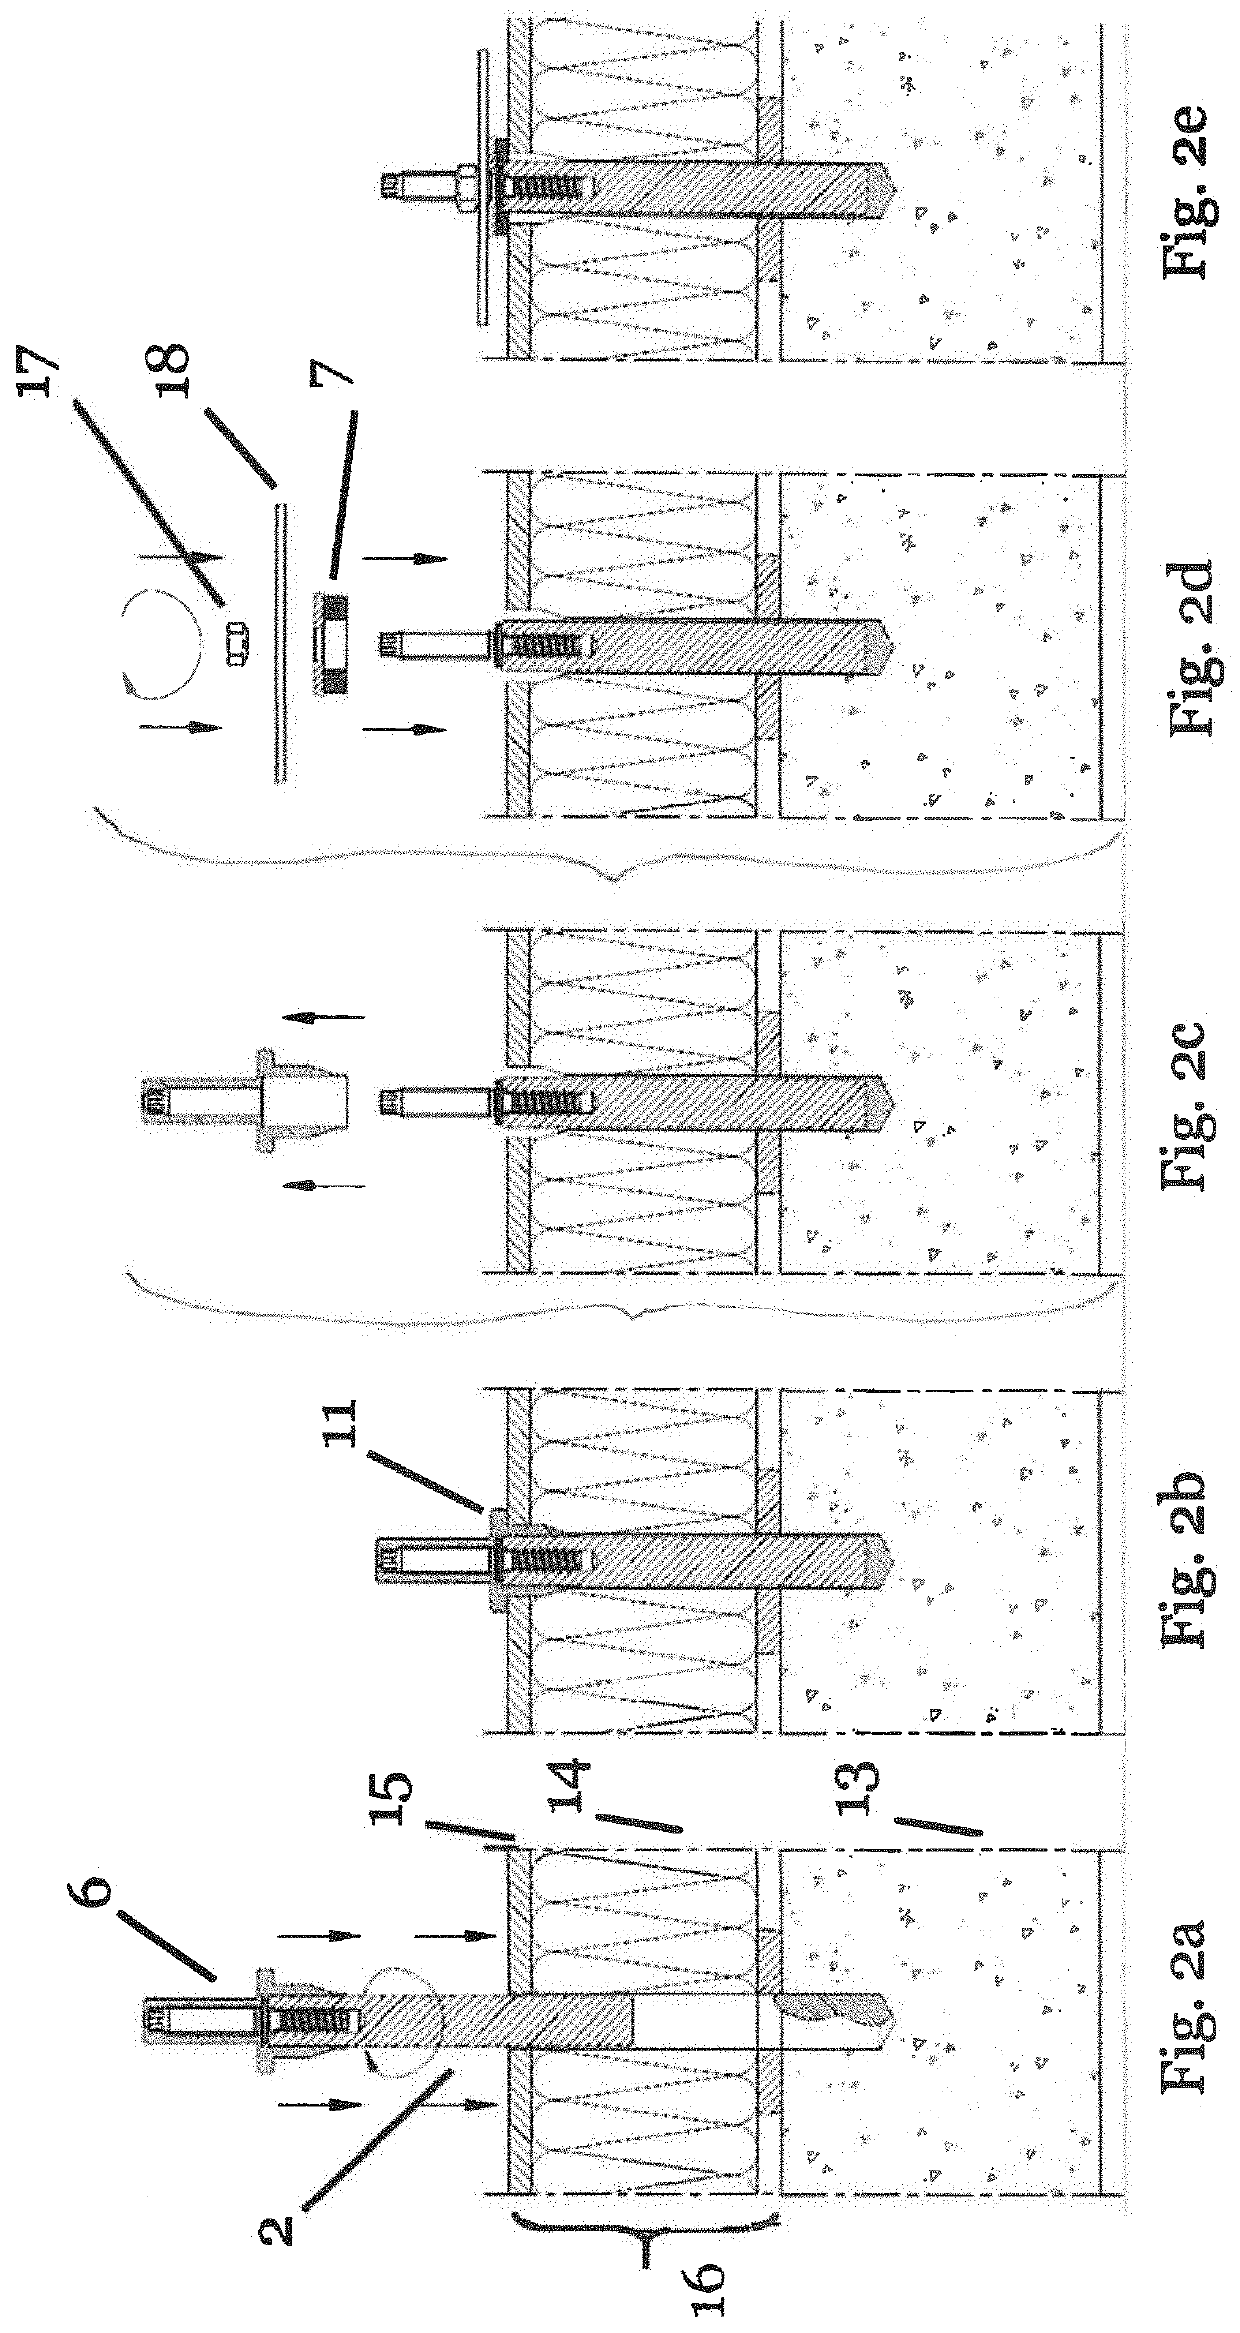 System for fastening attachments to a substrate with an insulation layer